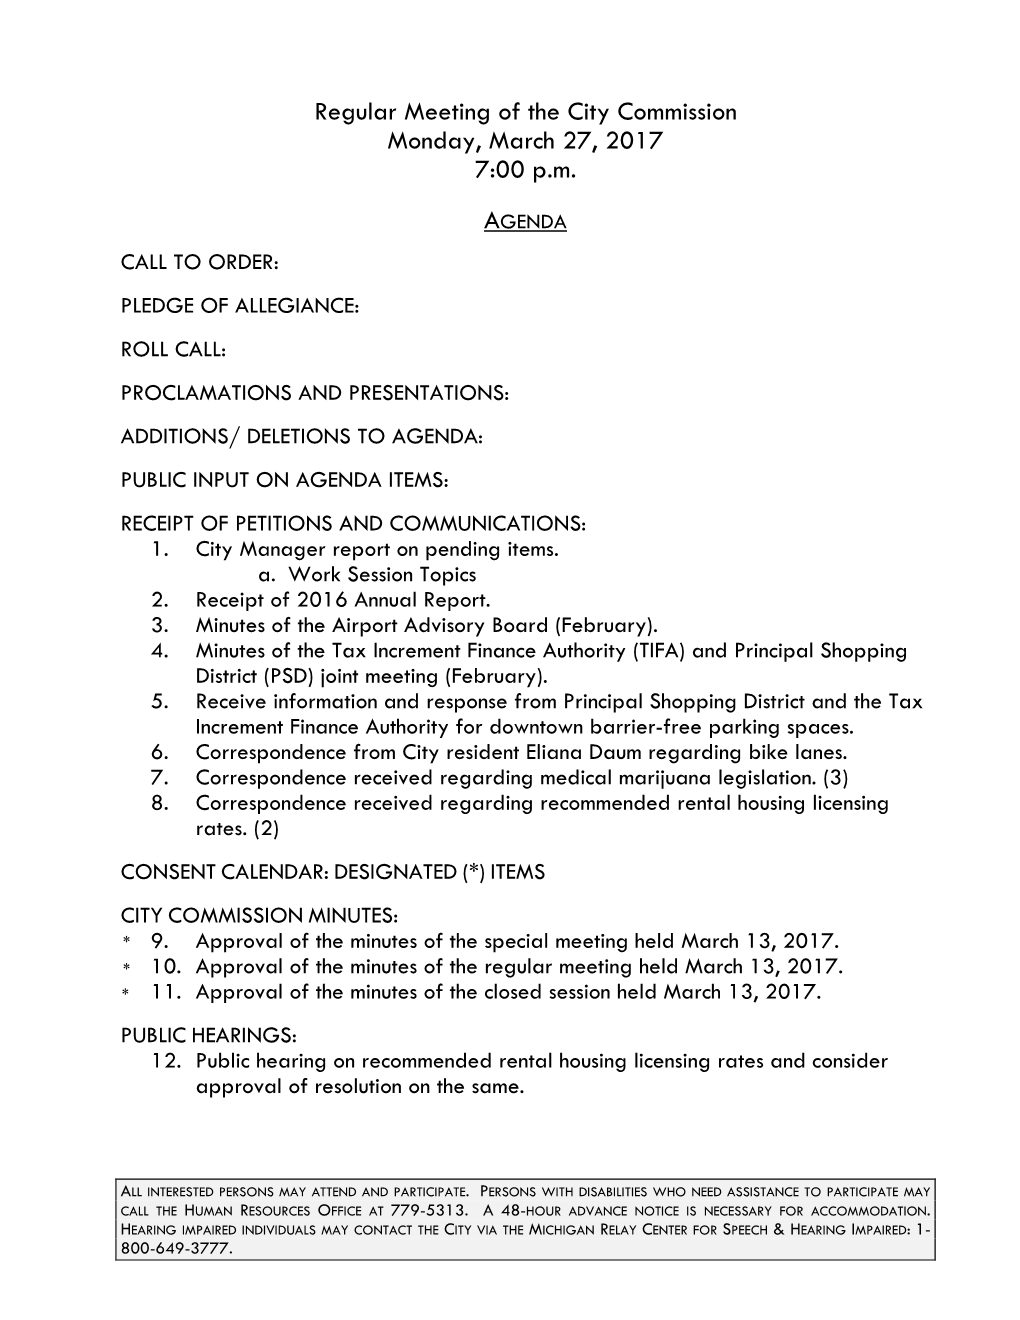 Regular Meeting of the City Commission Monday, March 27, 2017 7:00 P.M